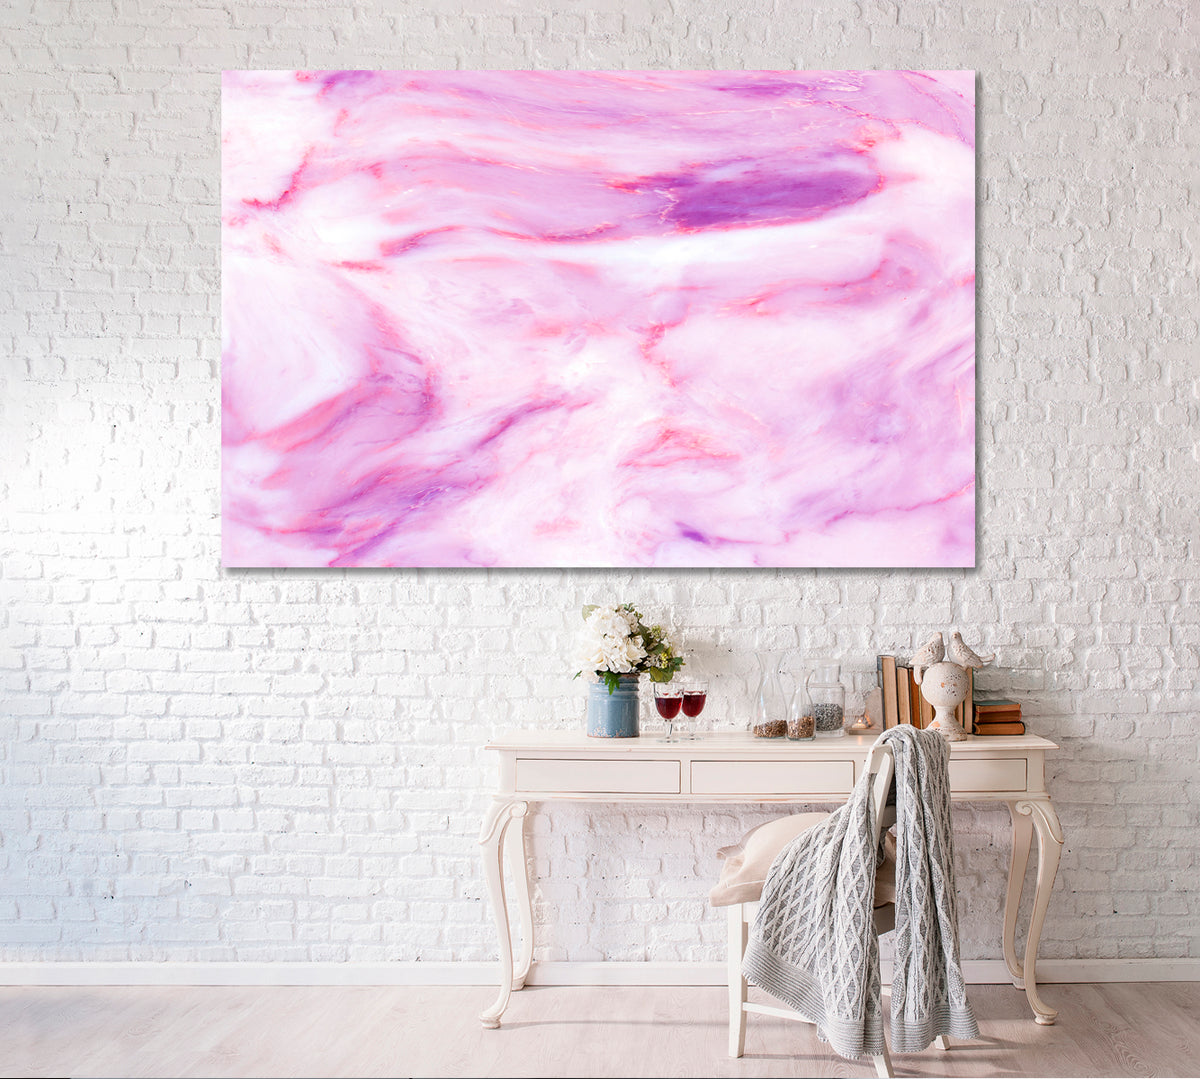 Abstract Pink Marble with Veins Canvas Print ArtLexy 1 Panel 24"x16" inches 